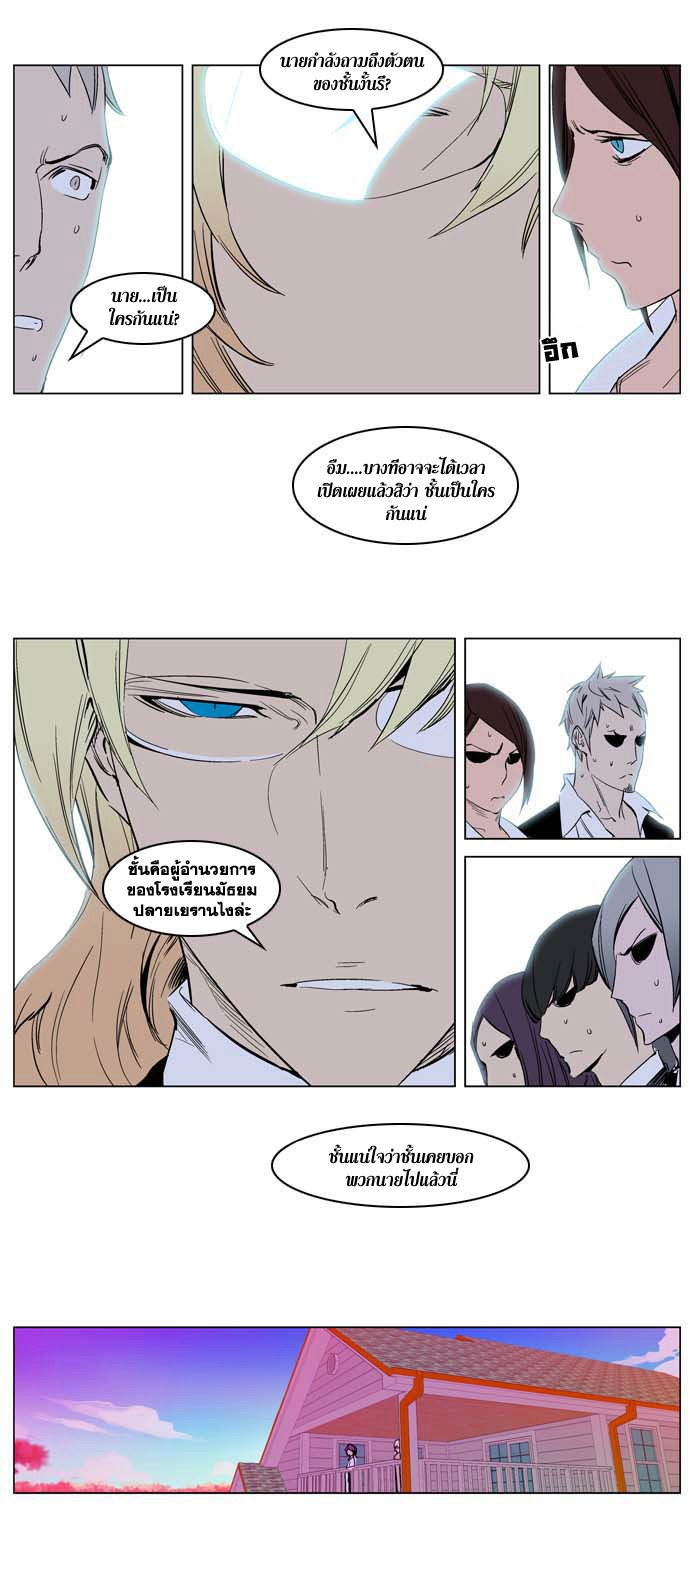 Noblesse 238 014